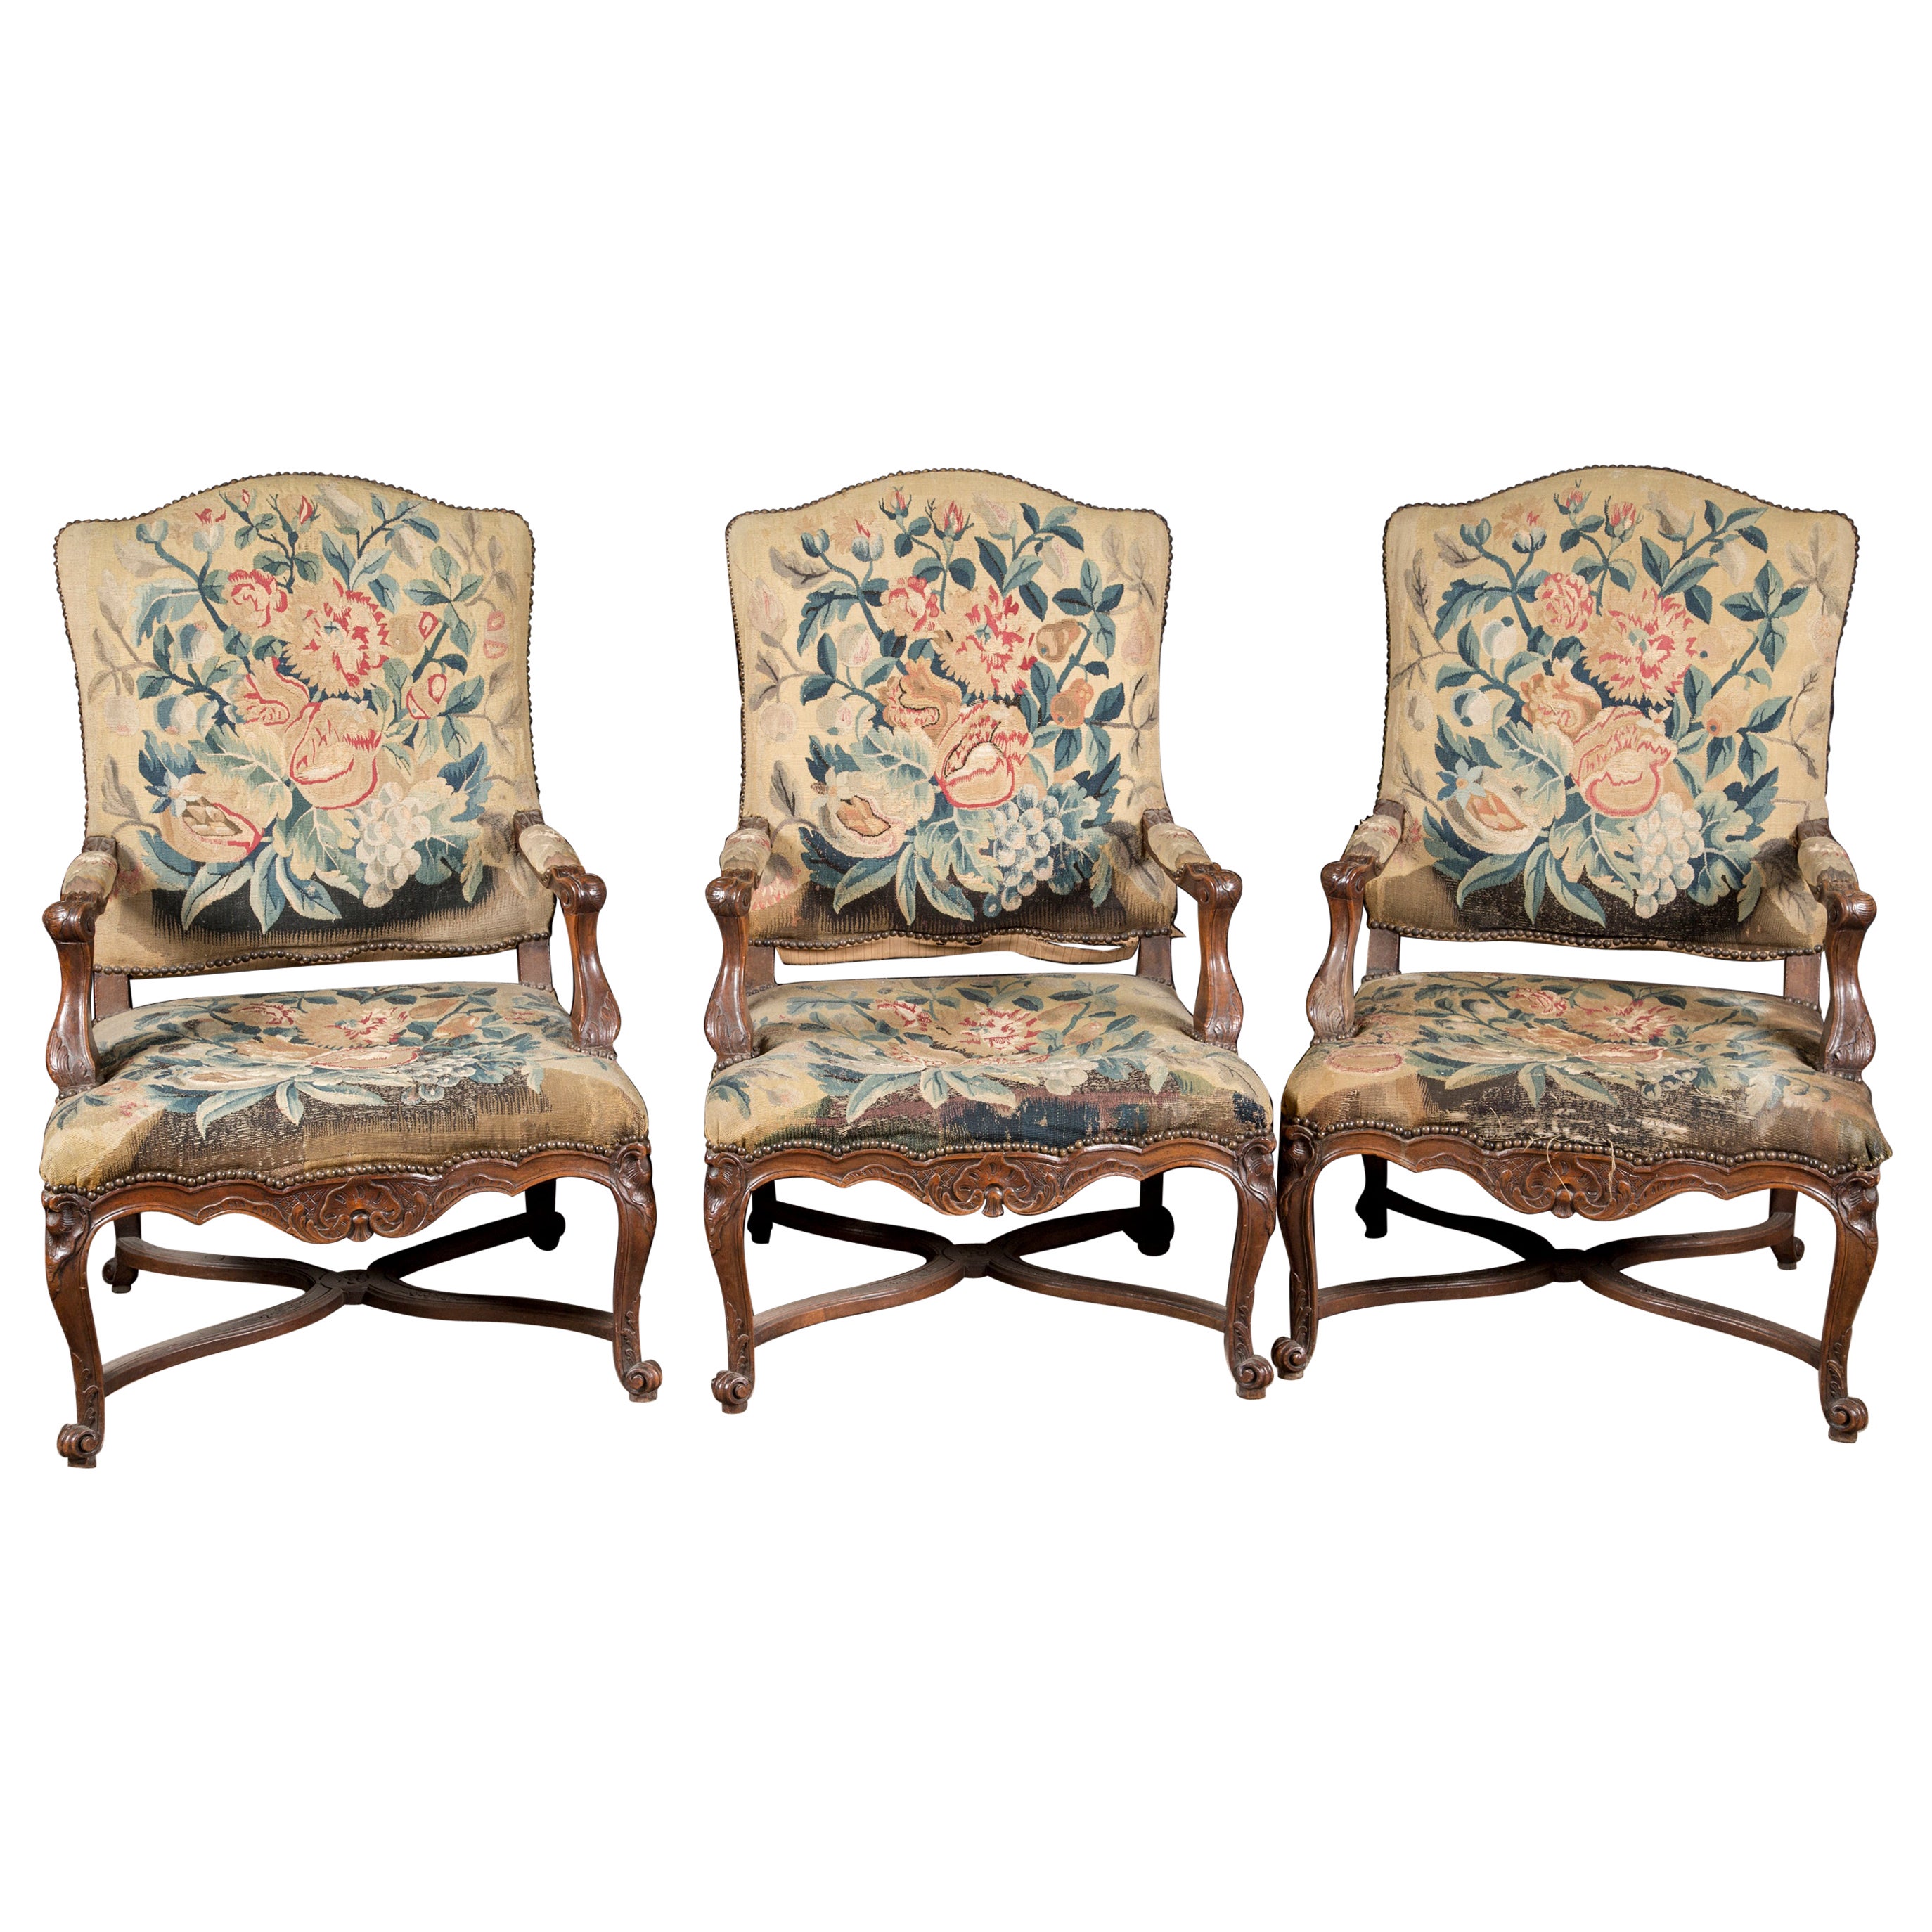 Aubusson Tapestry Walnut Armchairs, 19th Century French, Louis XV '3 Available' For Sale